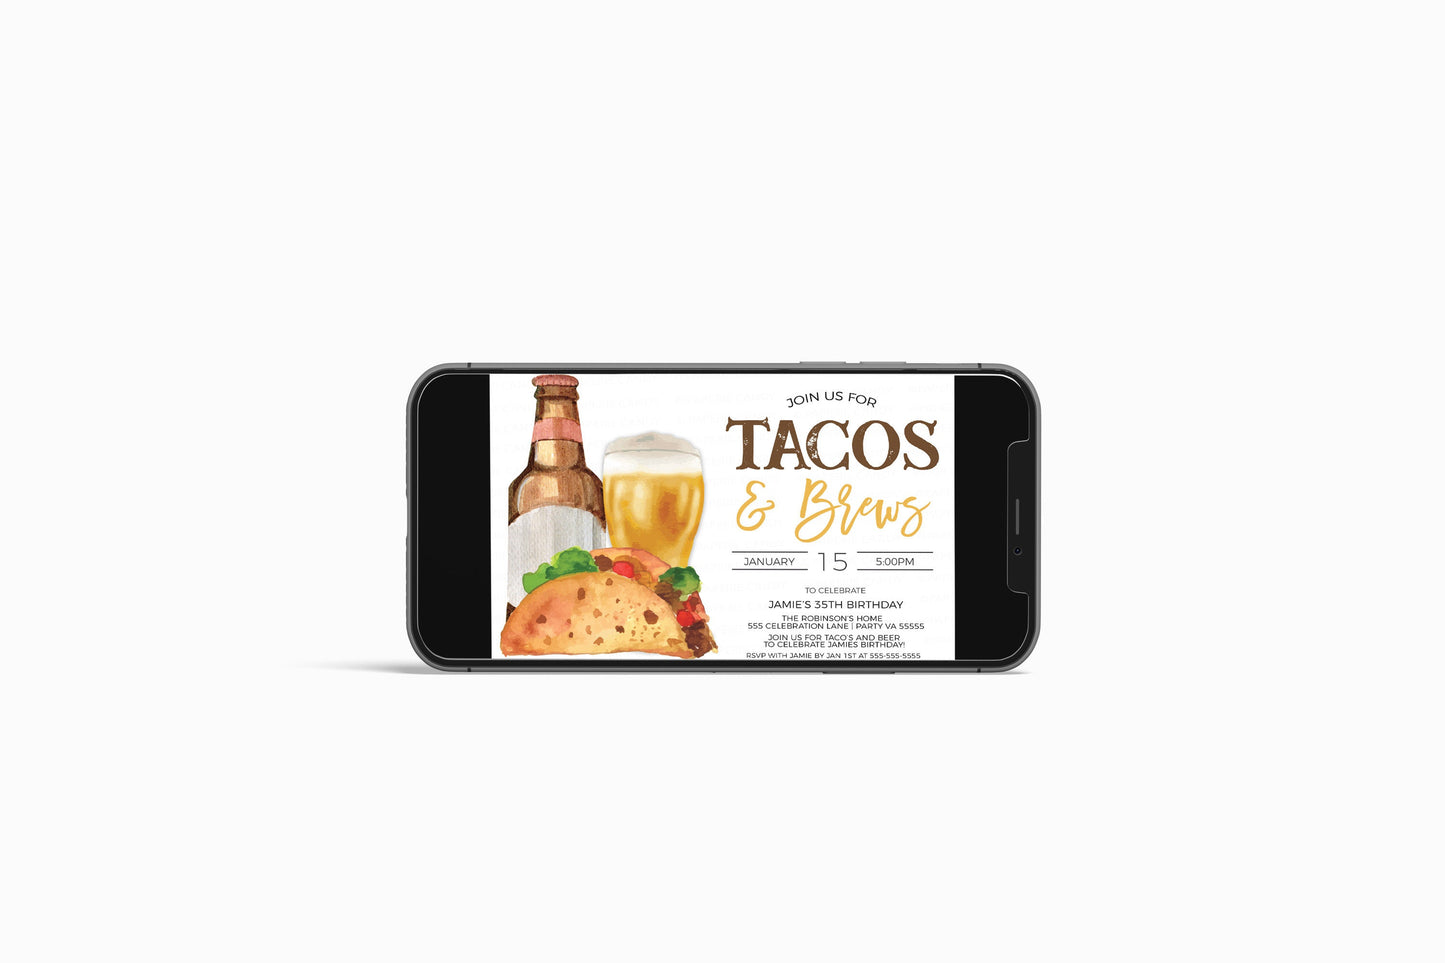 Tacos And Beer Invitation, Taco Bar Party Invite, Surprise Taco & Brews Birthday Party, Retirement Party Digital Editable Printable Template